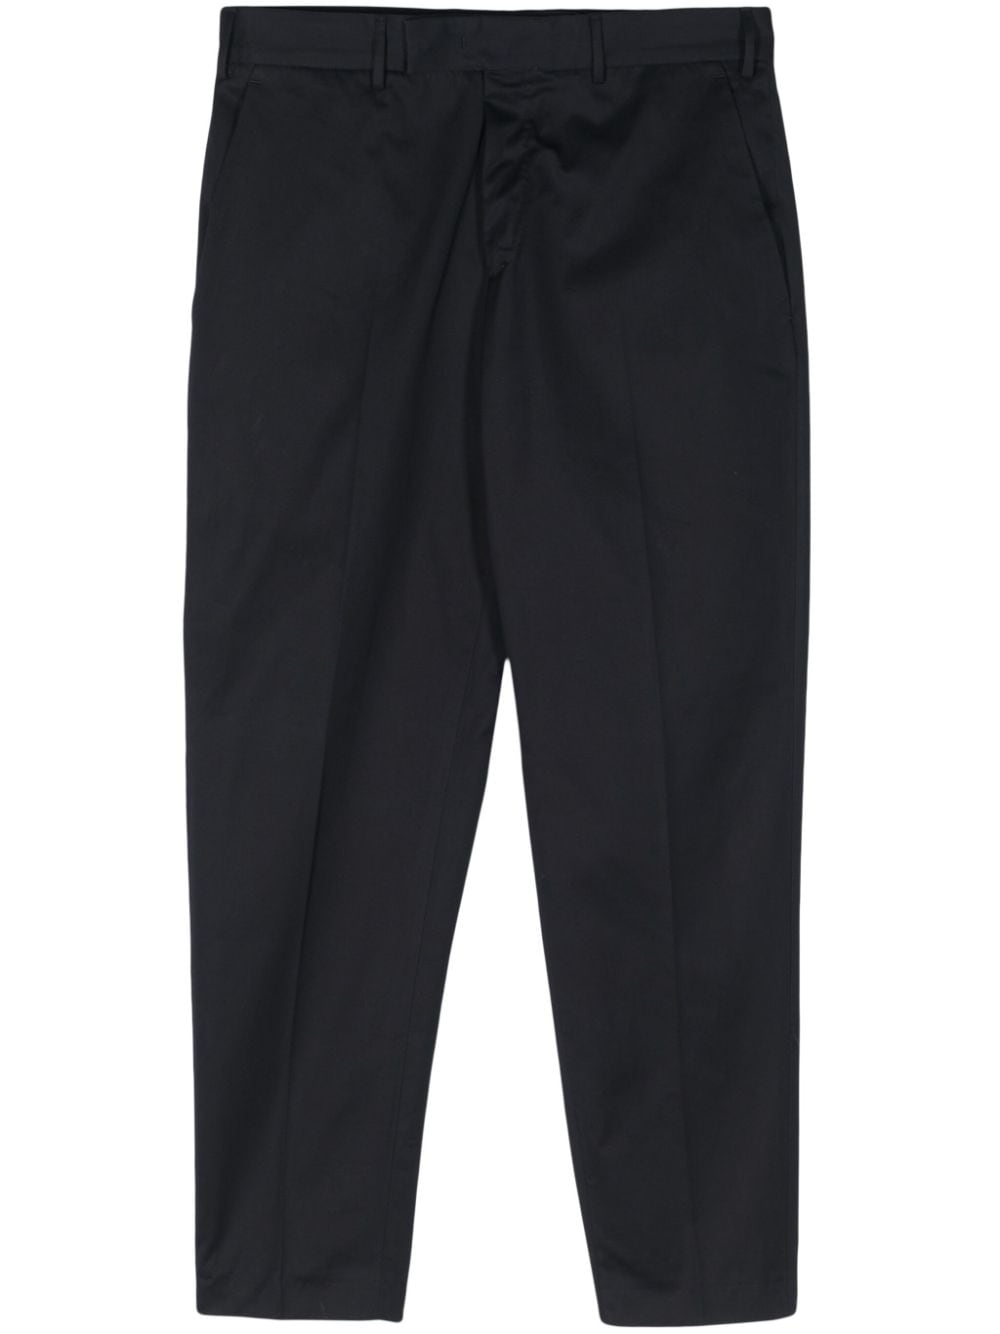 mid-rise cotton chino trousers